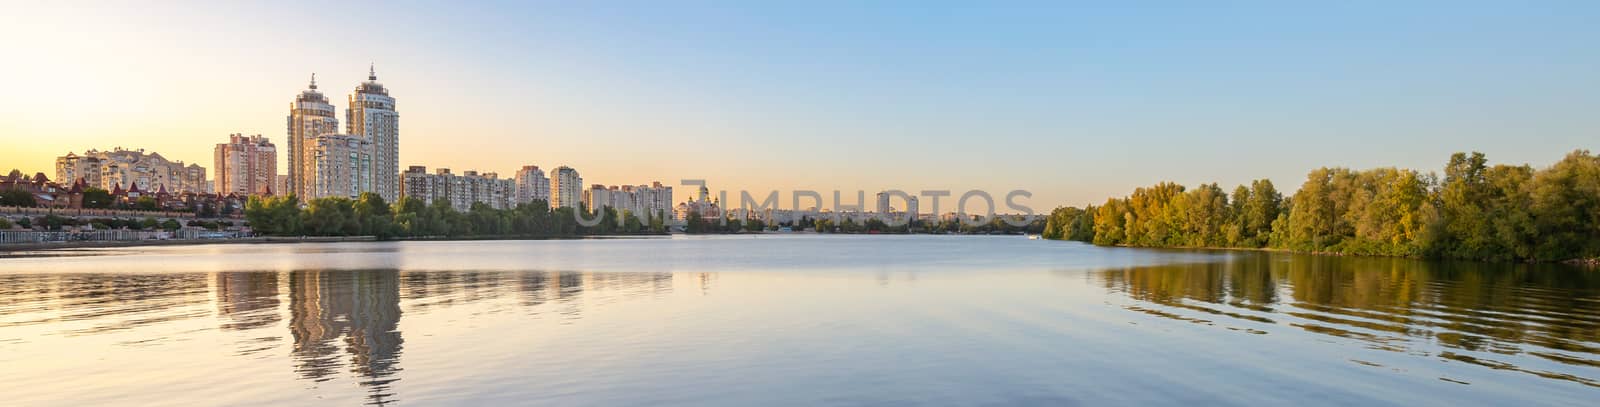 Panoramic view oth the high Obolon buildings near the Dnieper river in Kiev, Ukraine. Blue clear sky and reflection in the water.